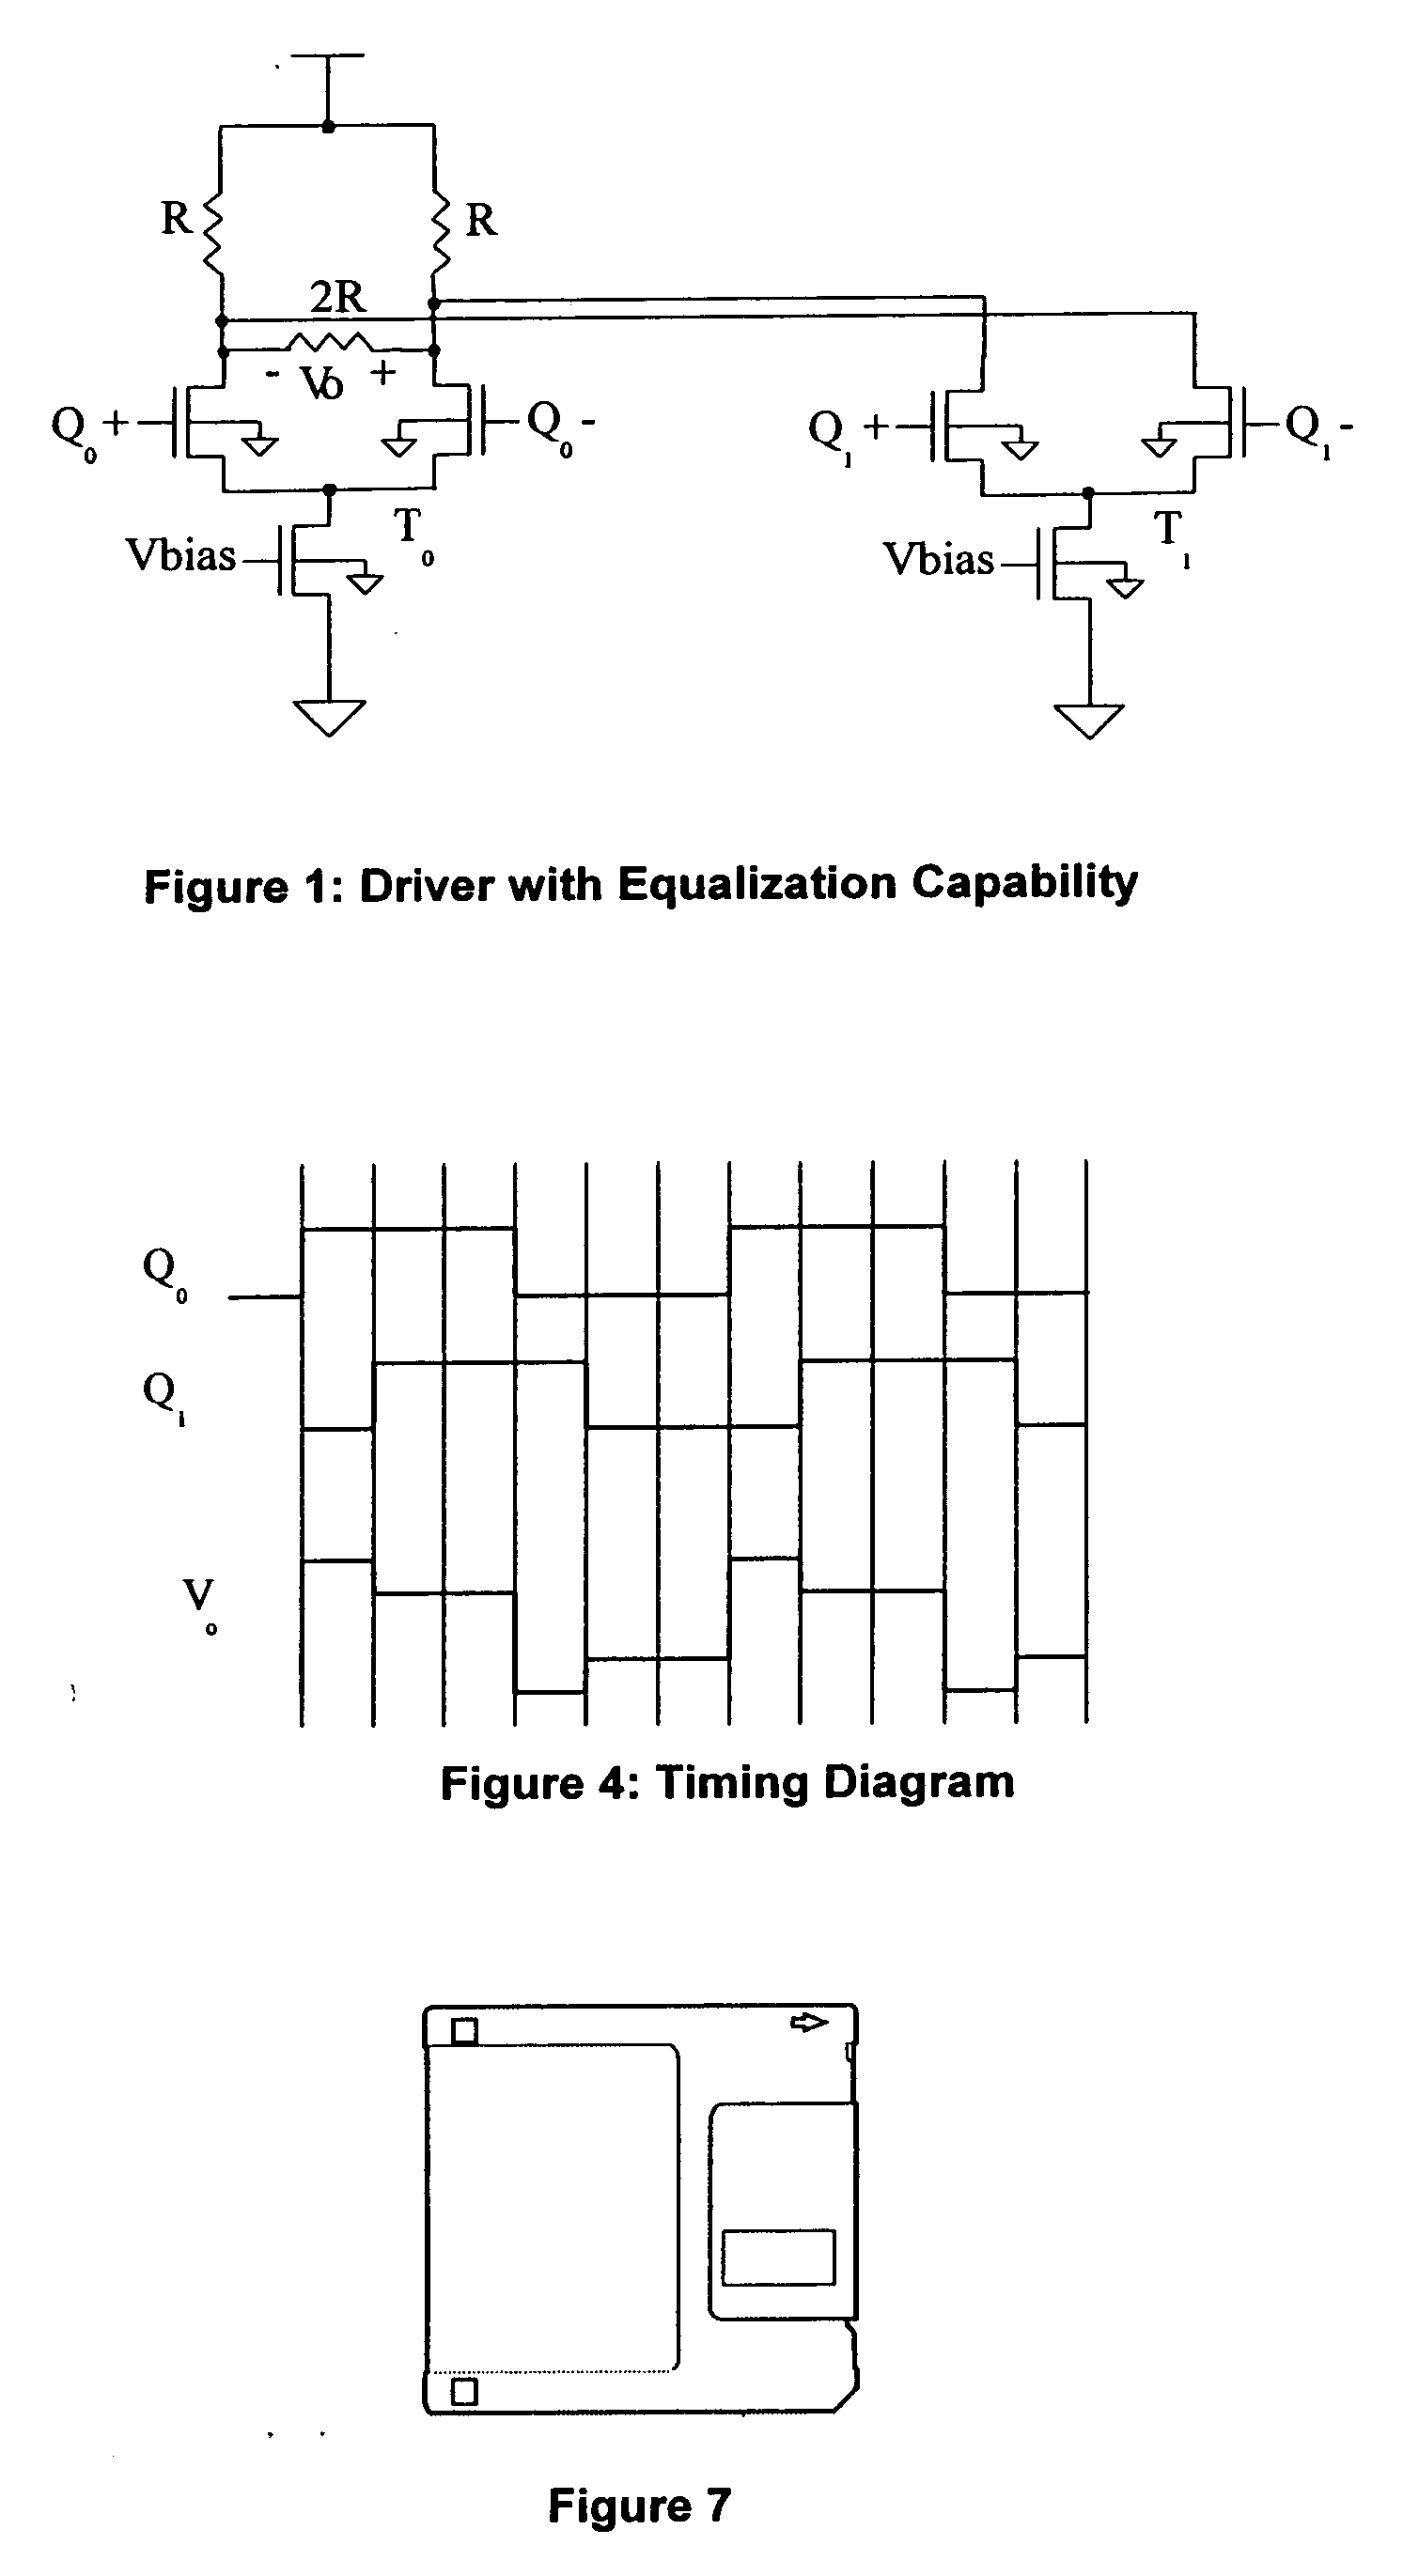 Driver/equalizer with compensation for equalization non-idealities